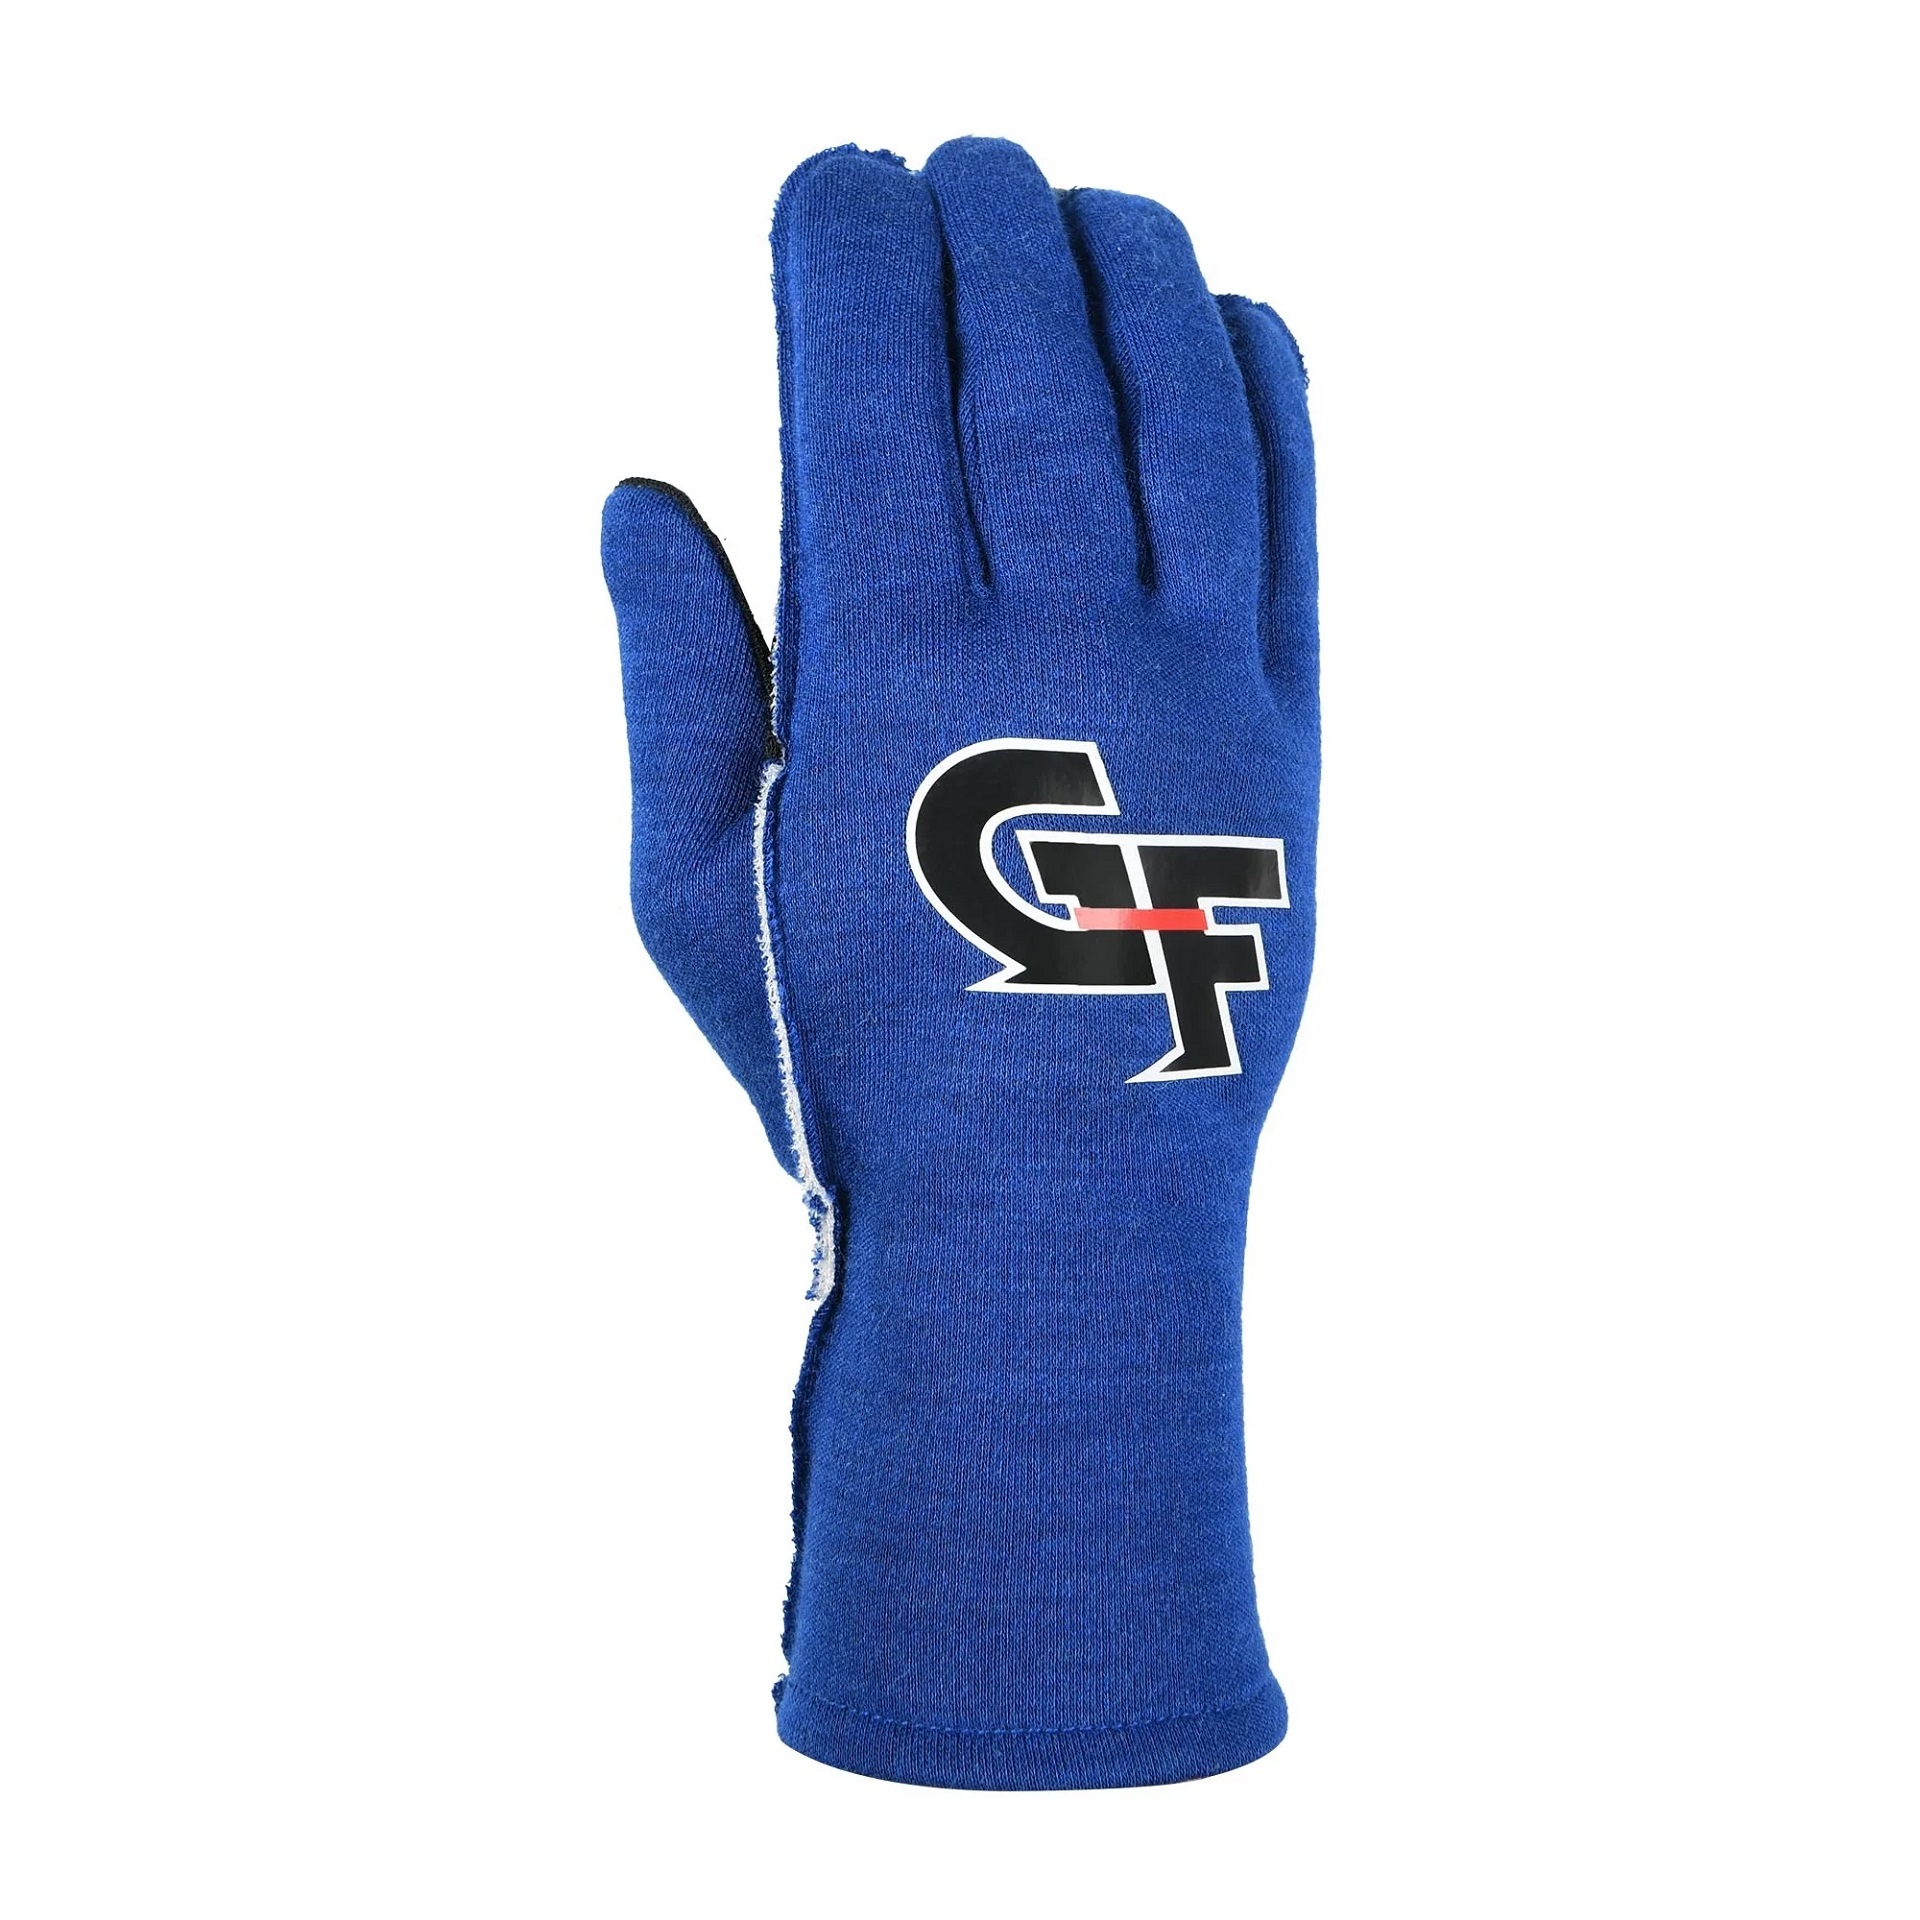 G-FORCE Gloves G-Limit XX-Small Blue